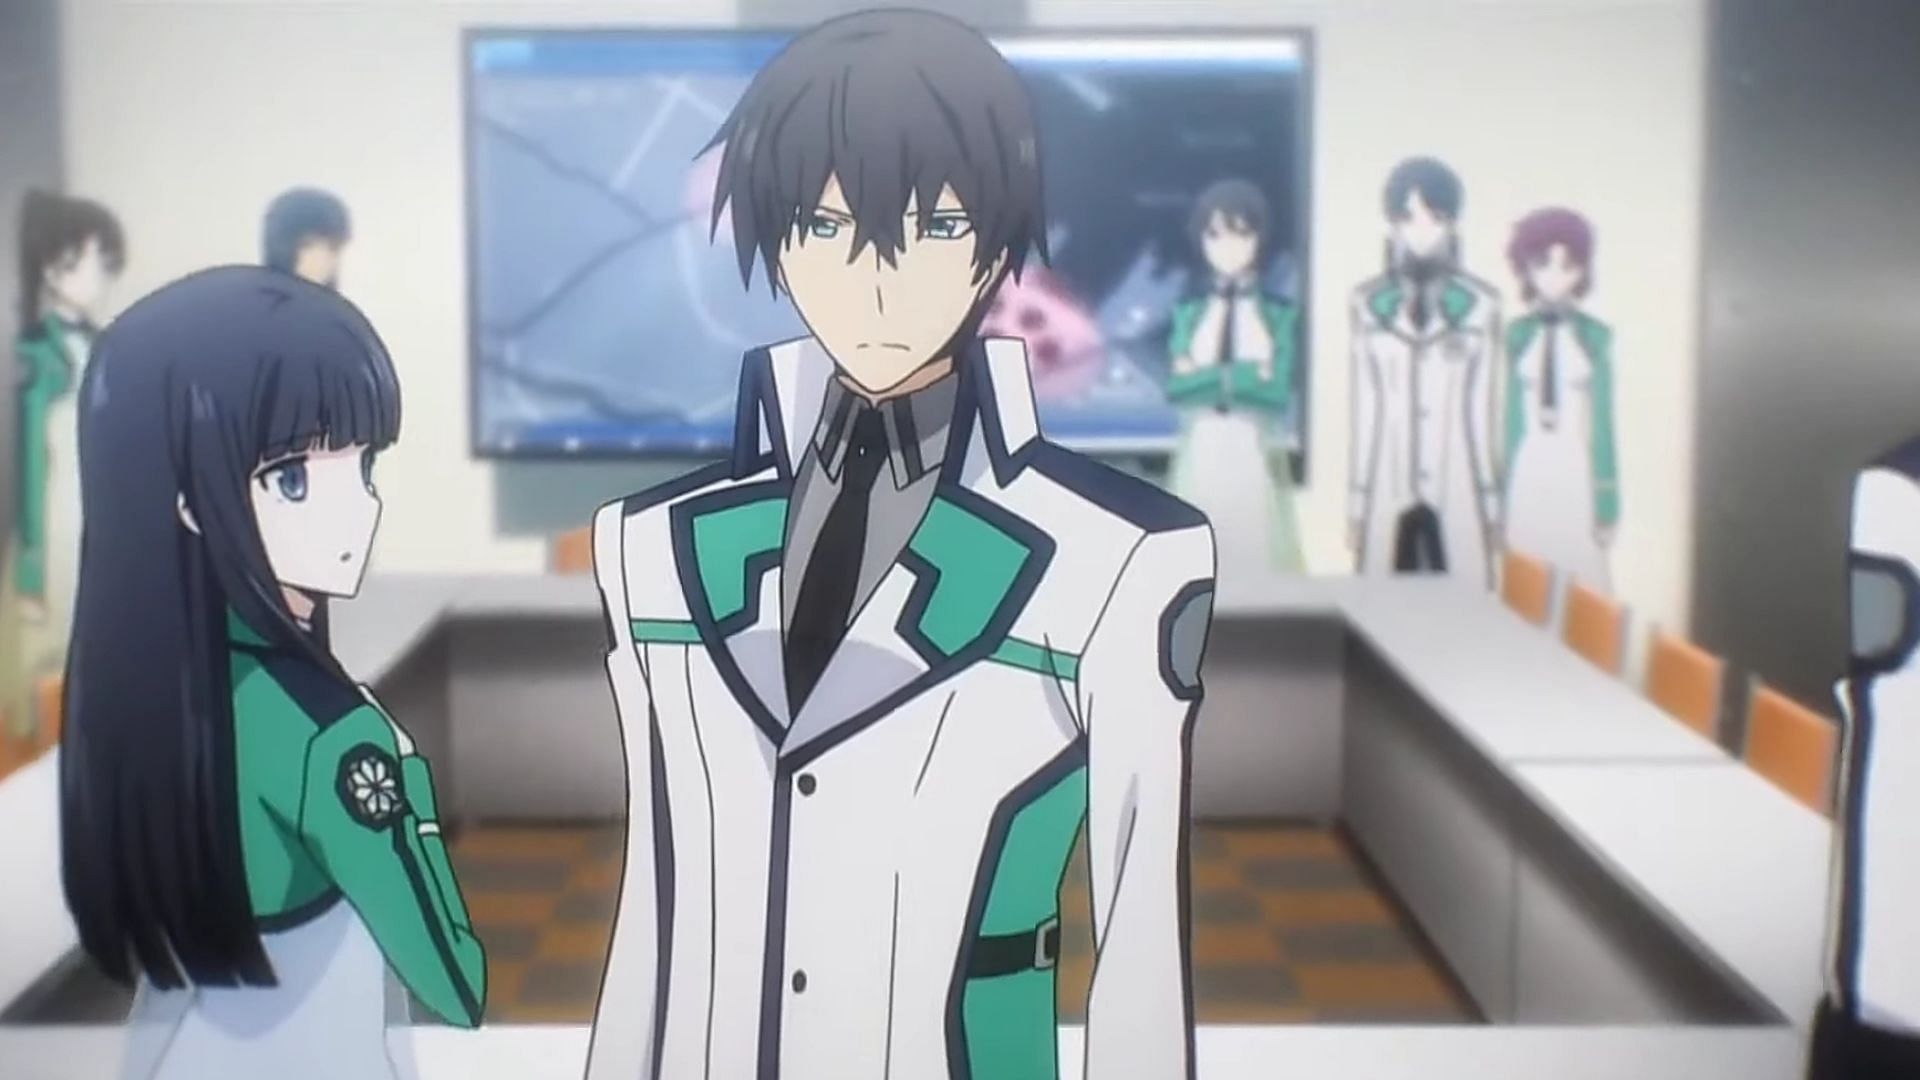 From The Irregular at Magic High School (Image via Studio Connect)